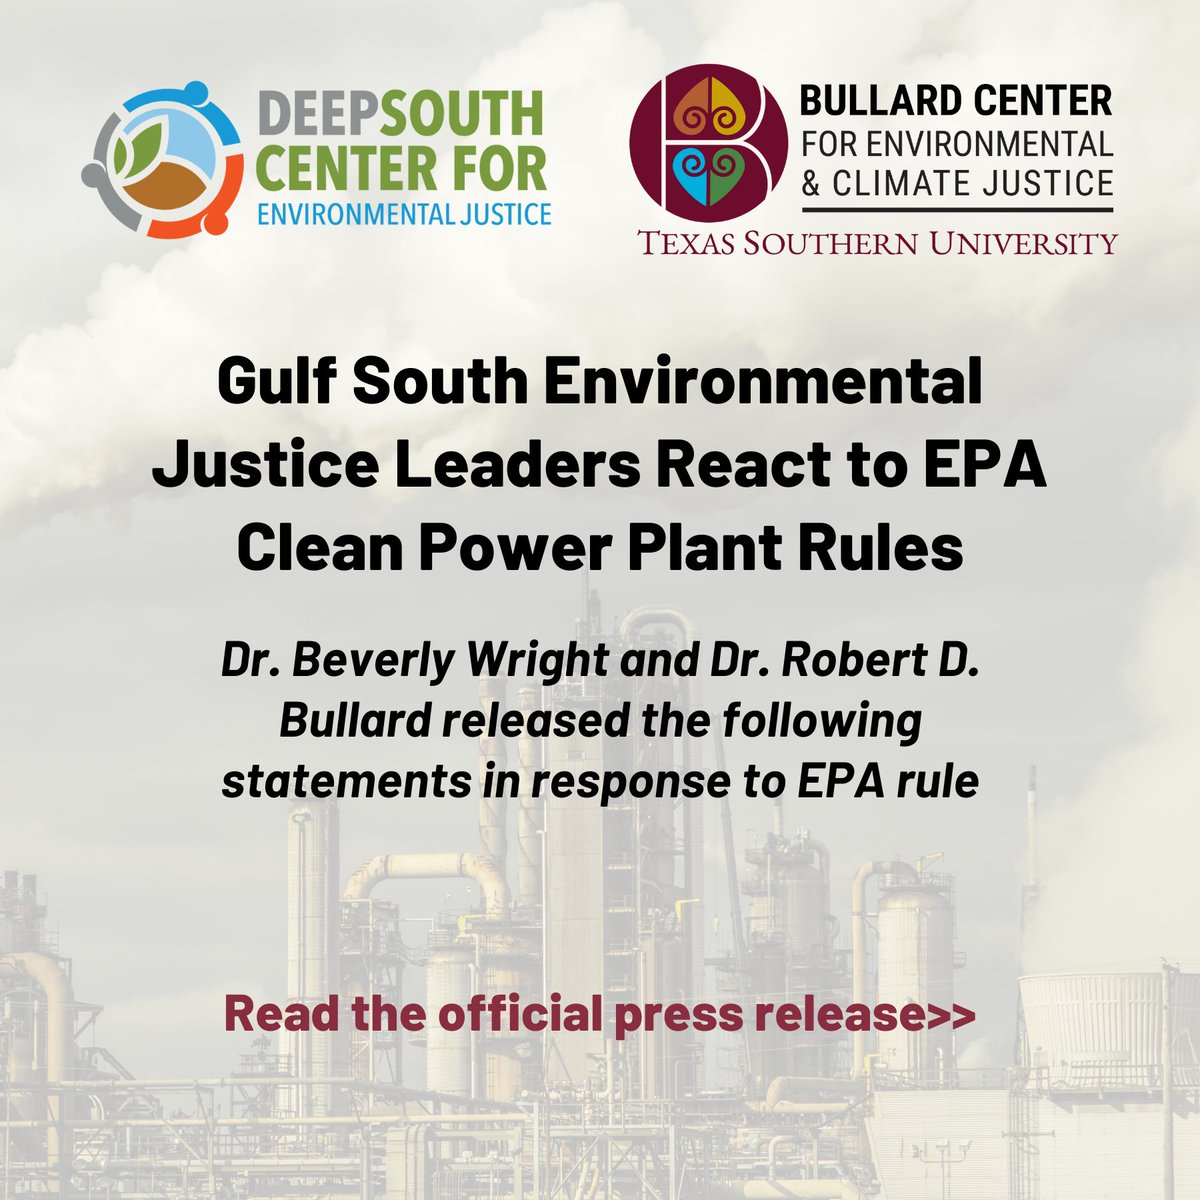 Gulf South Environmental Justice Leaders React to @EPA Clean Power Plant Rules. Dr. Beverly Wright and Dr. Robert D. Bullard urge EPA to address pollution & advocate for renewables: ow.ly/re9I50RpwqX #ClimateAction #EnvironmentalJustice #CleanAir #EnergyJustice